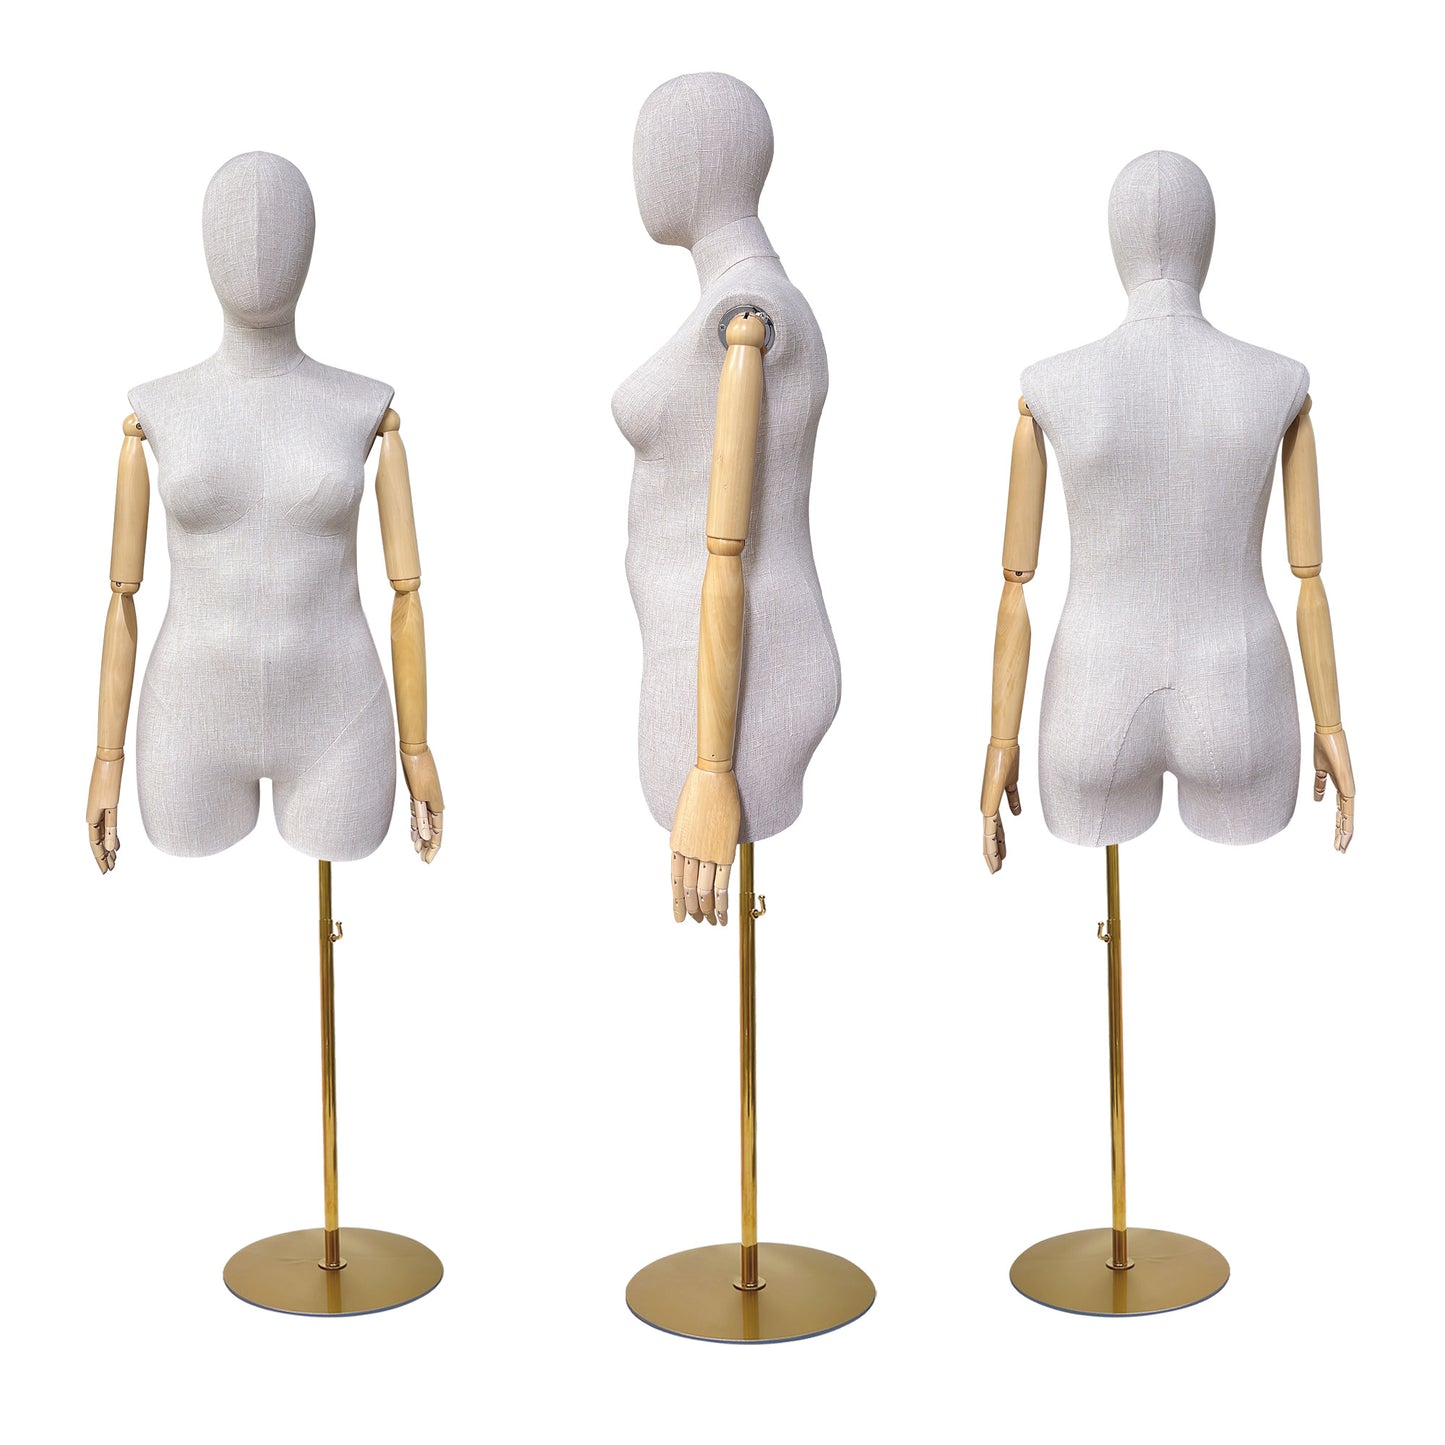 Adult Female Plus Size Torso Mannequin,Half Body Mannequin Torso,Bamboo Linen Fabric Clothing Dress Form,Adult Props with Wooden Arms,Mannequin for Cloth Window Display